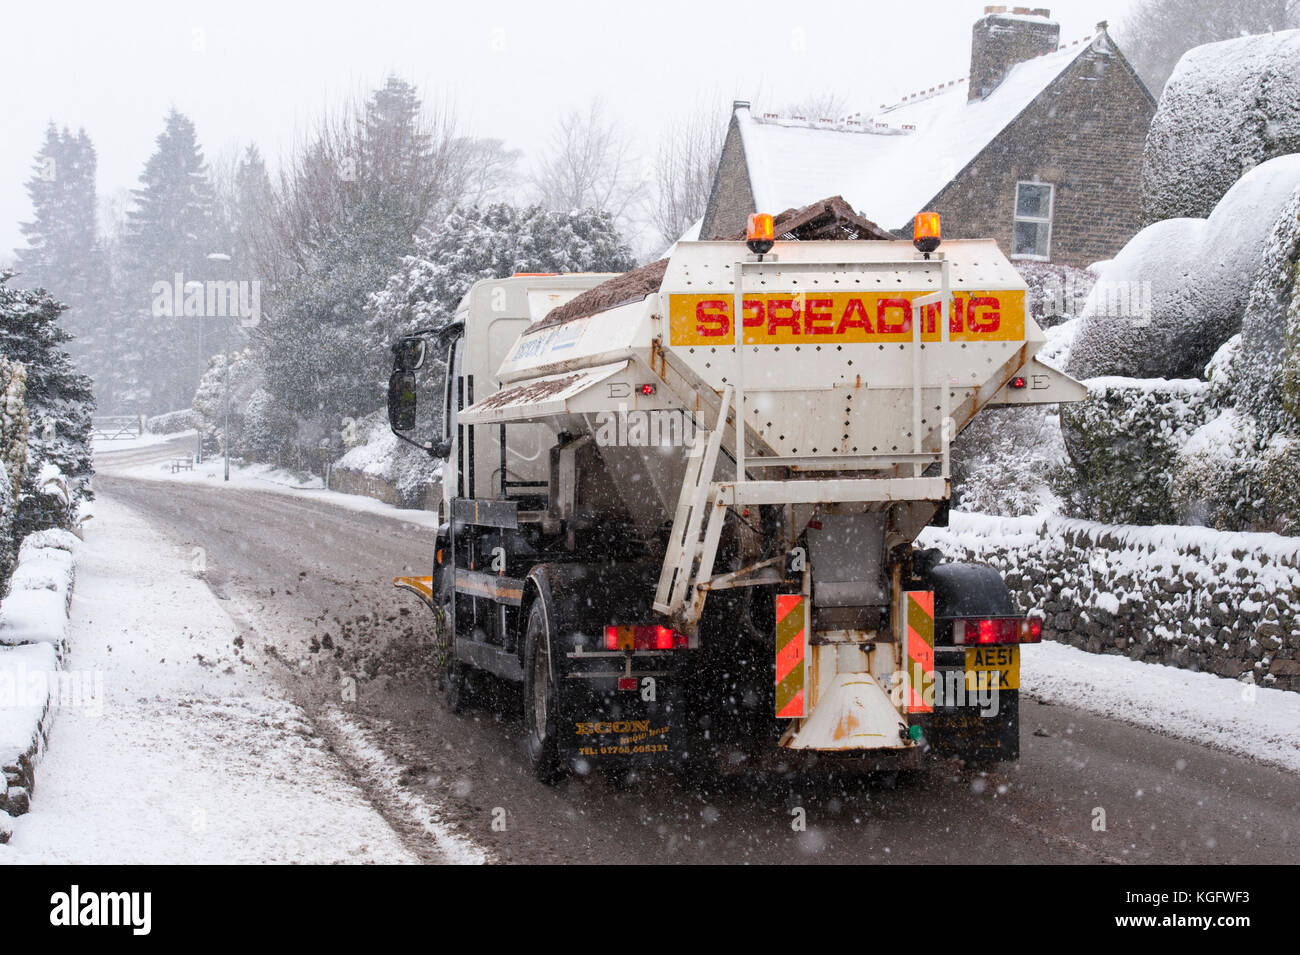 Cold, snowy winter scene as gritter lorry with snow plough, drives, spreading grit & clearing deserted road - Hawksworth, West Yorkshire, England, UK. Stock Photo